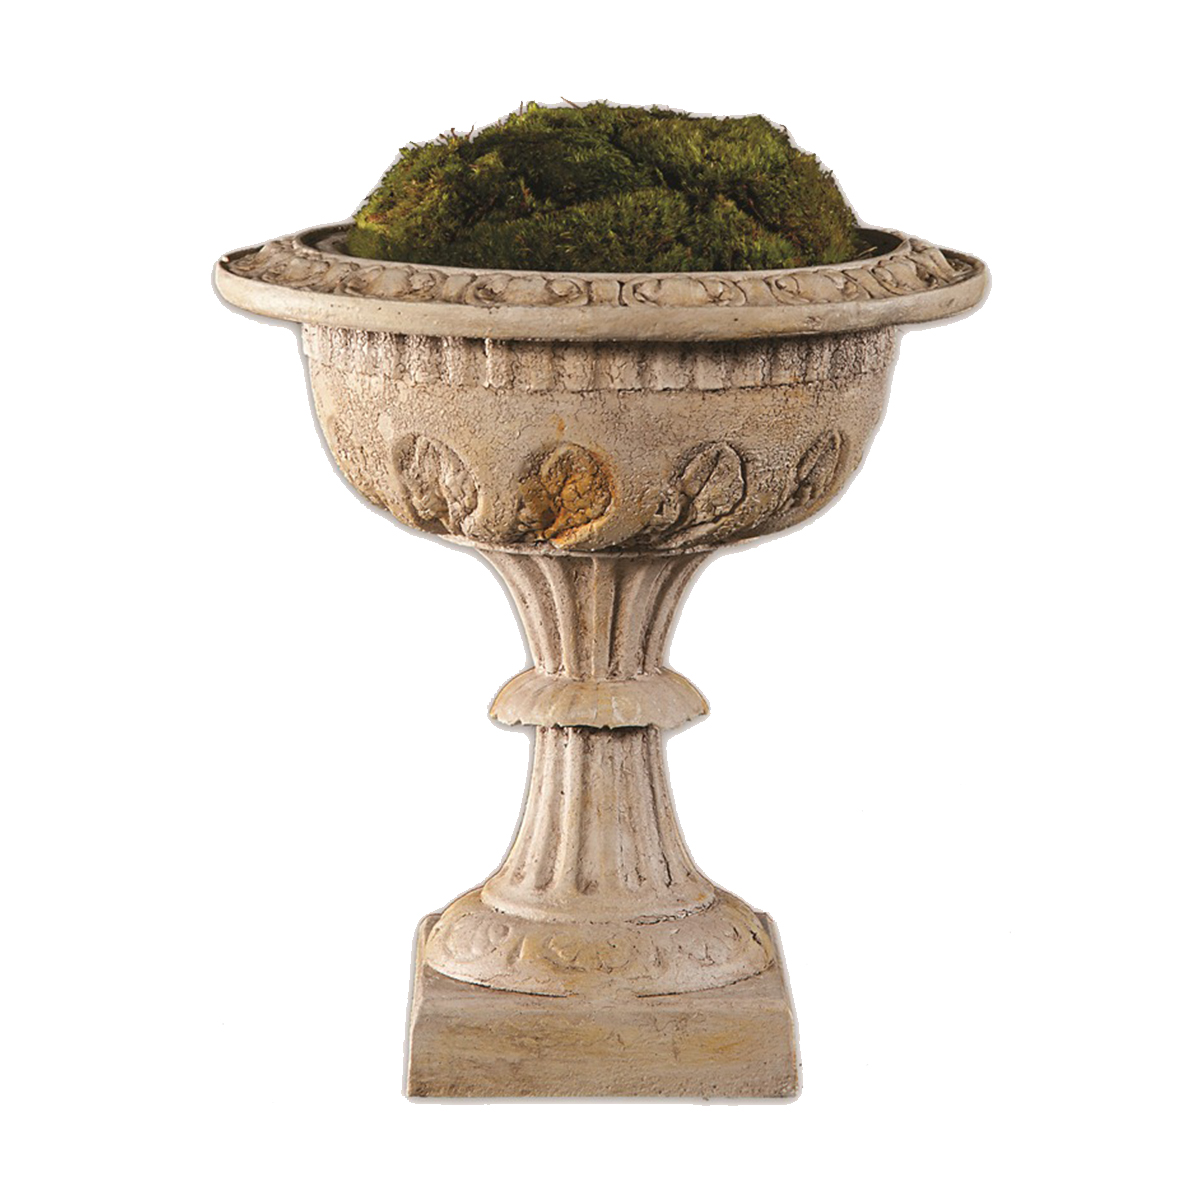 Featured image for “Large Classic Urn”